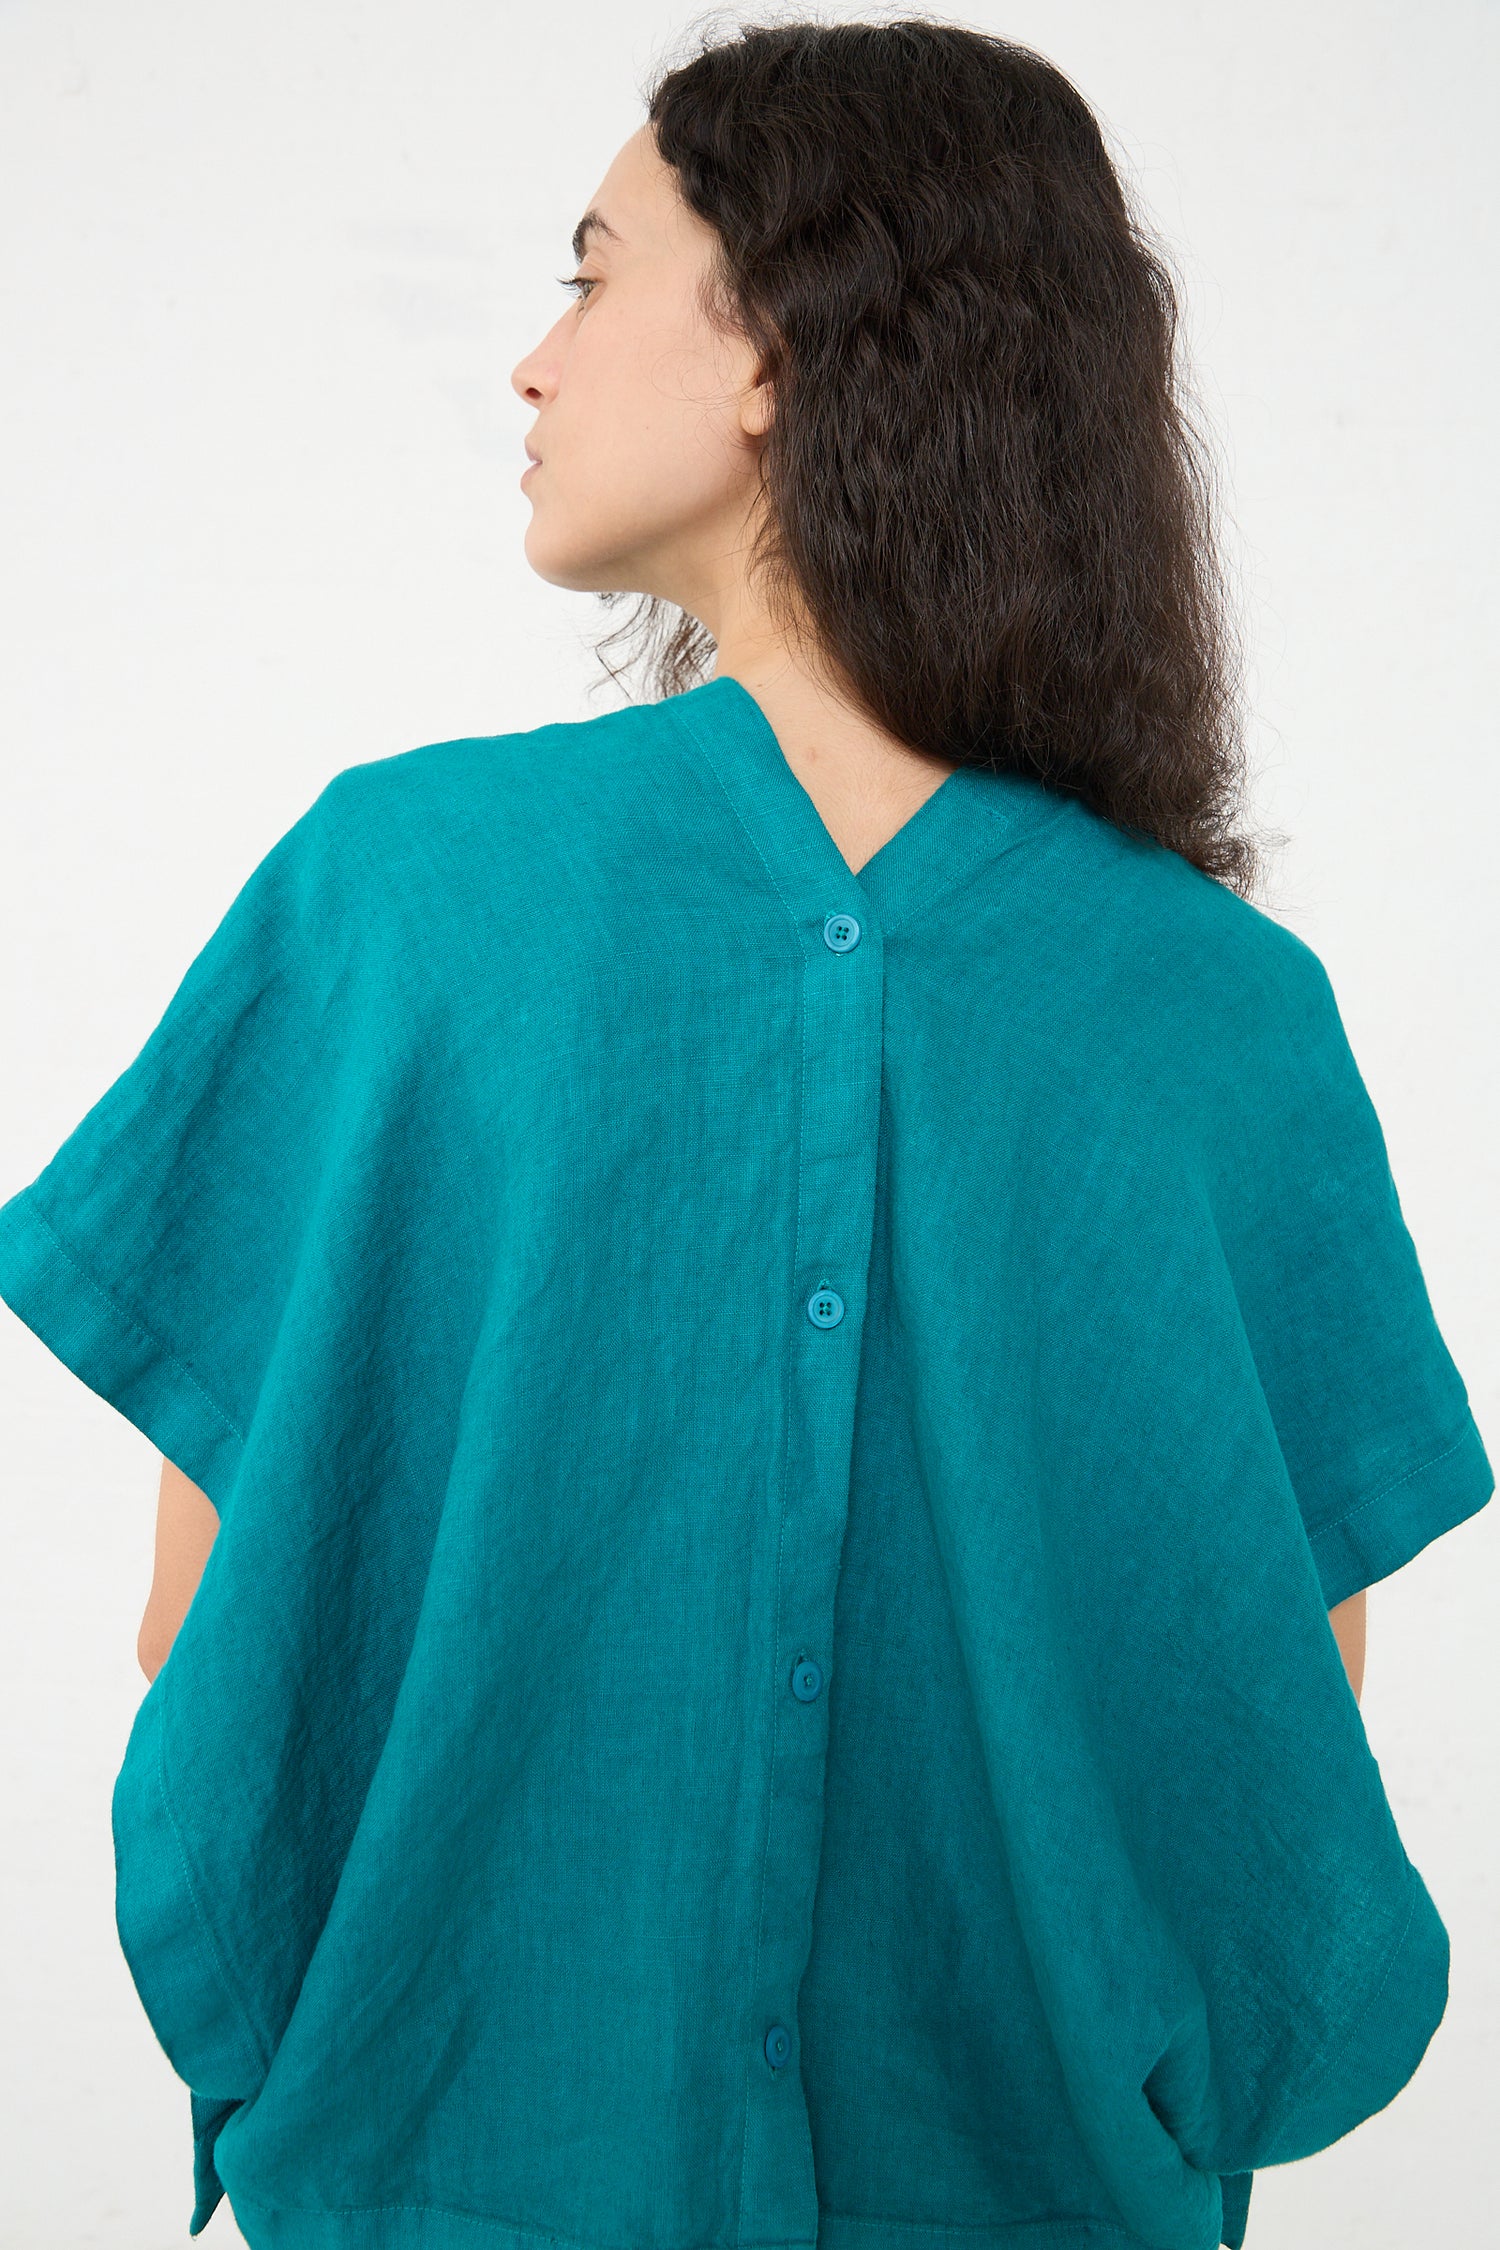 A woman wearing a Linen Origami Top in Peacock by Black Crane, with button details on the back, standing in profile against a white background.